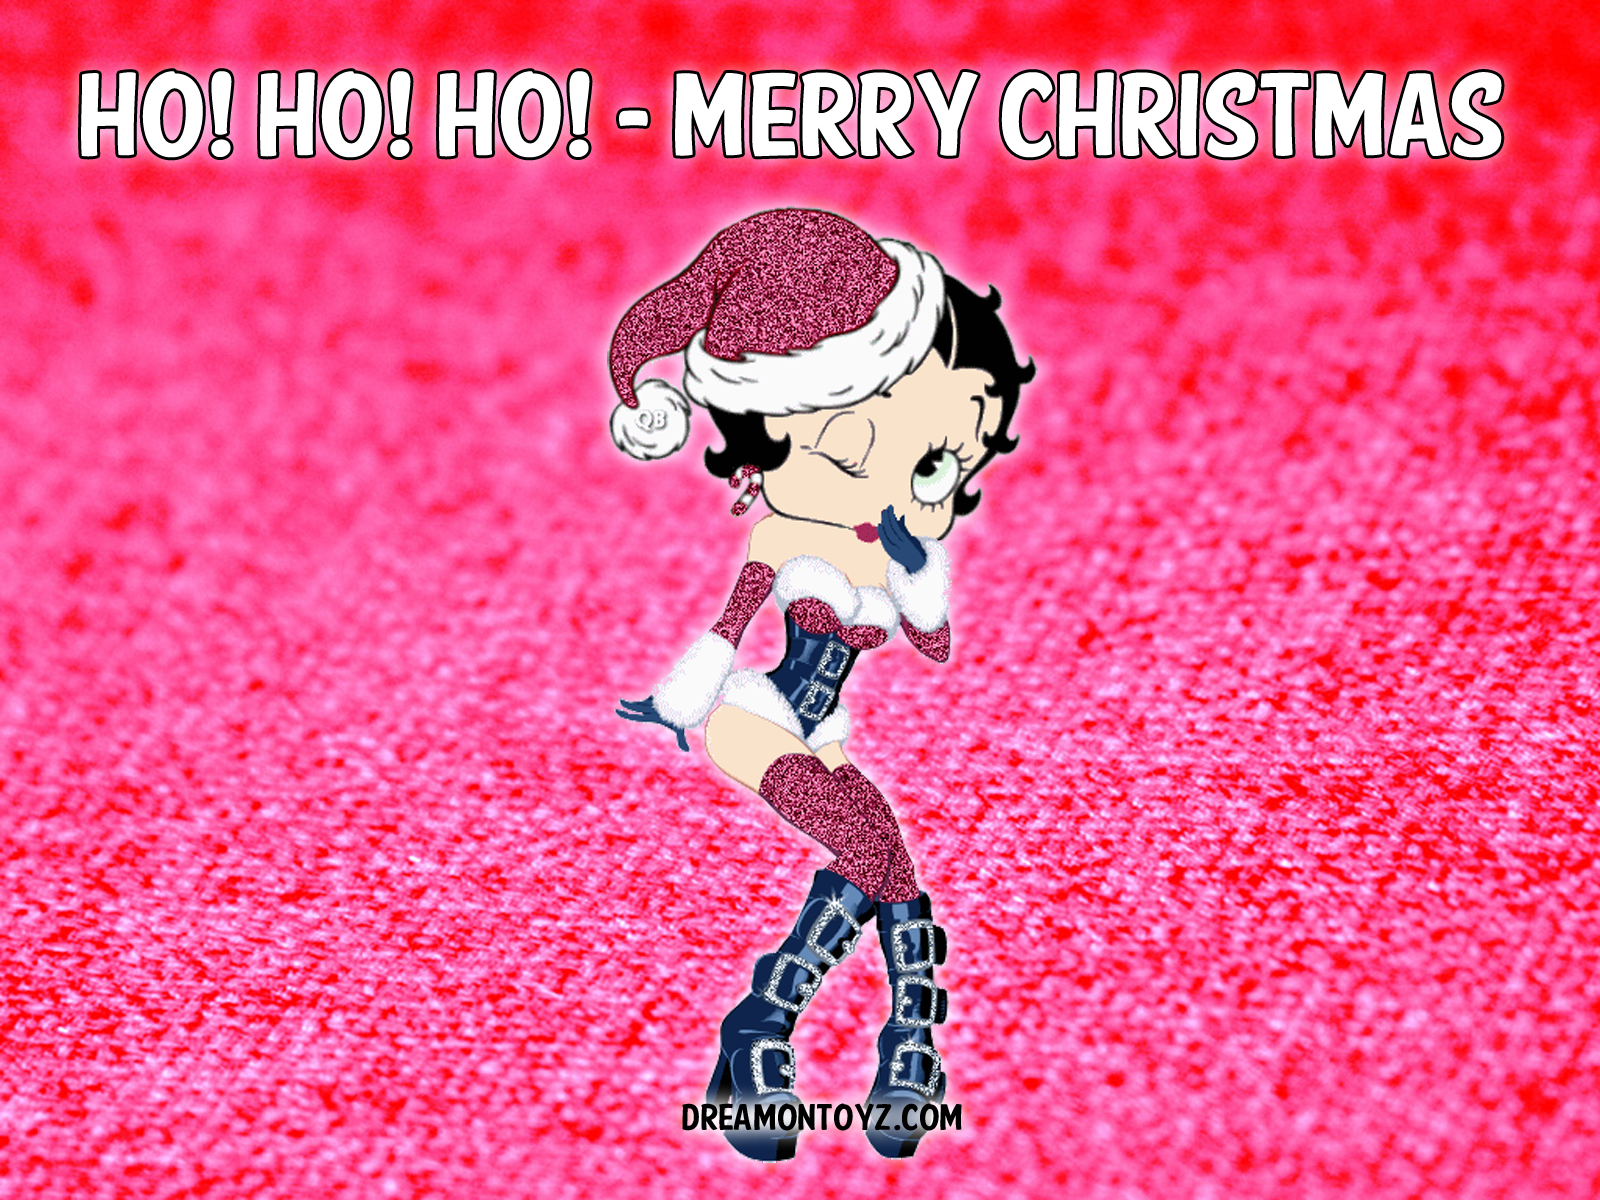 Betty Boop Pictures Christmas Archive